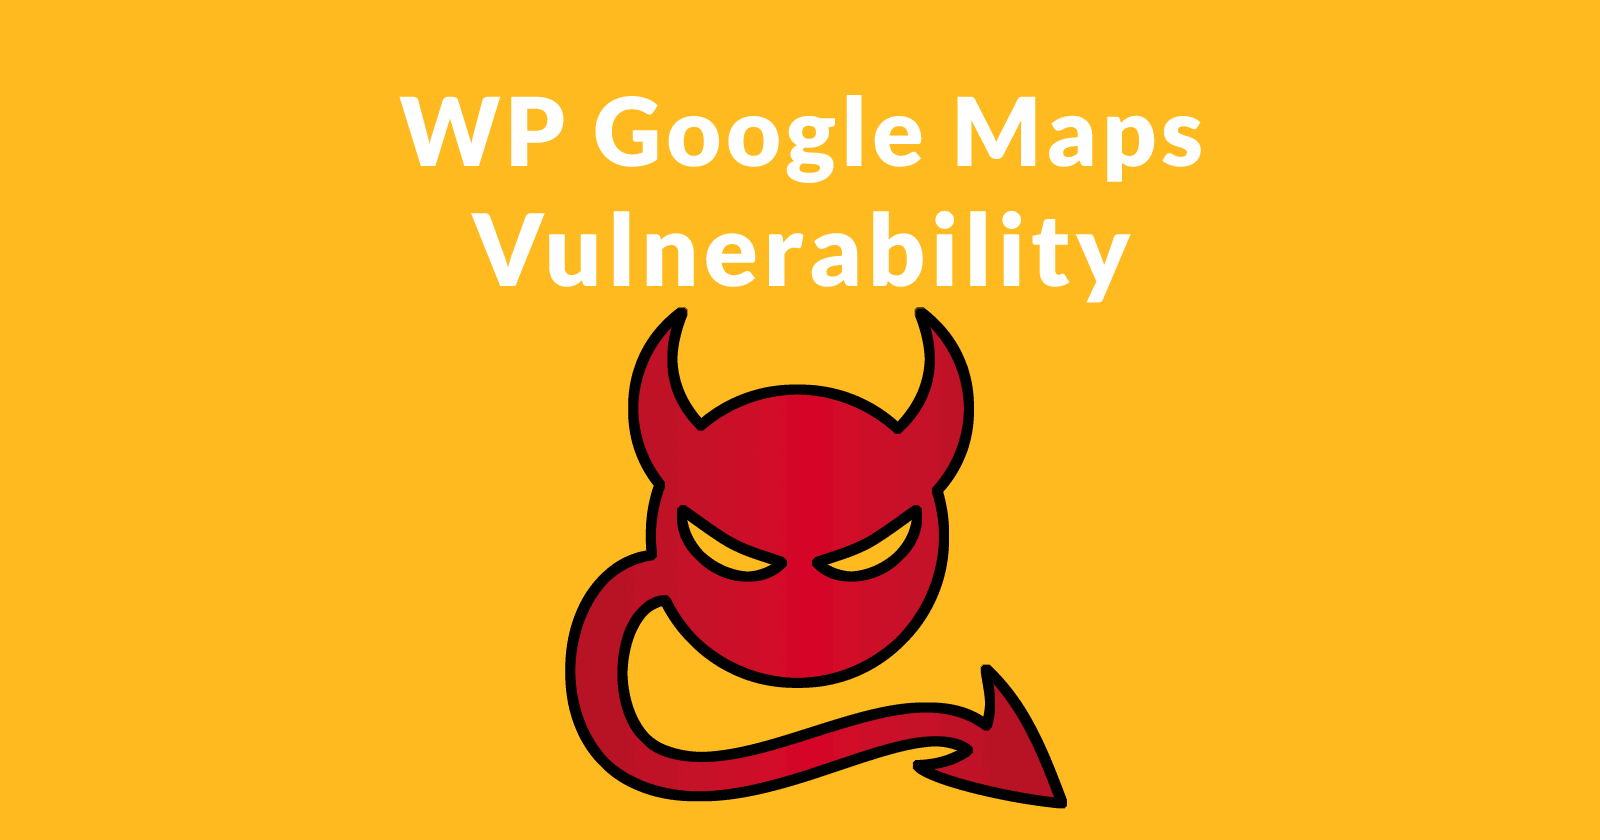 Image of a devilish head with the words WP Google Maps Vulnerability above it